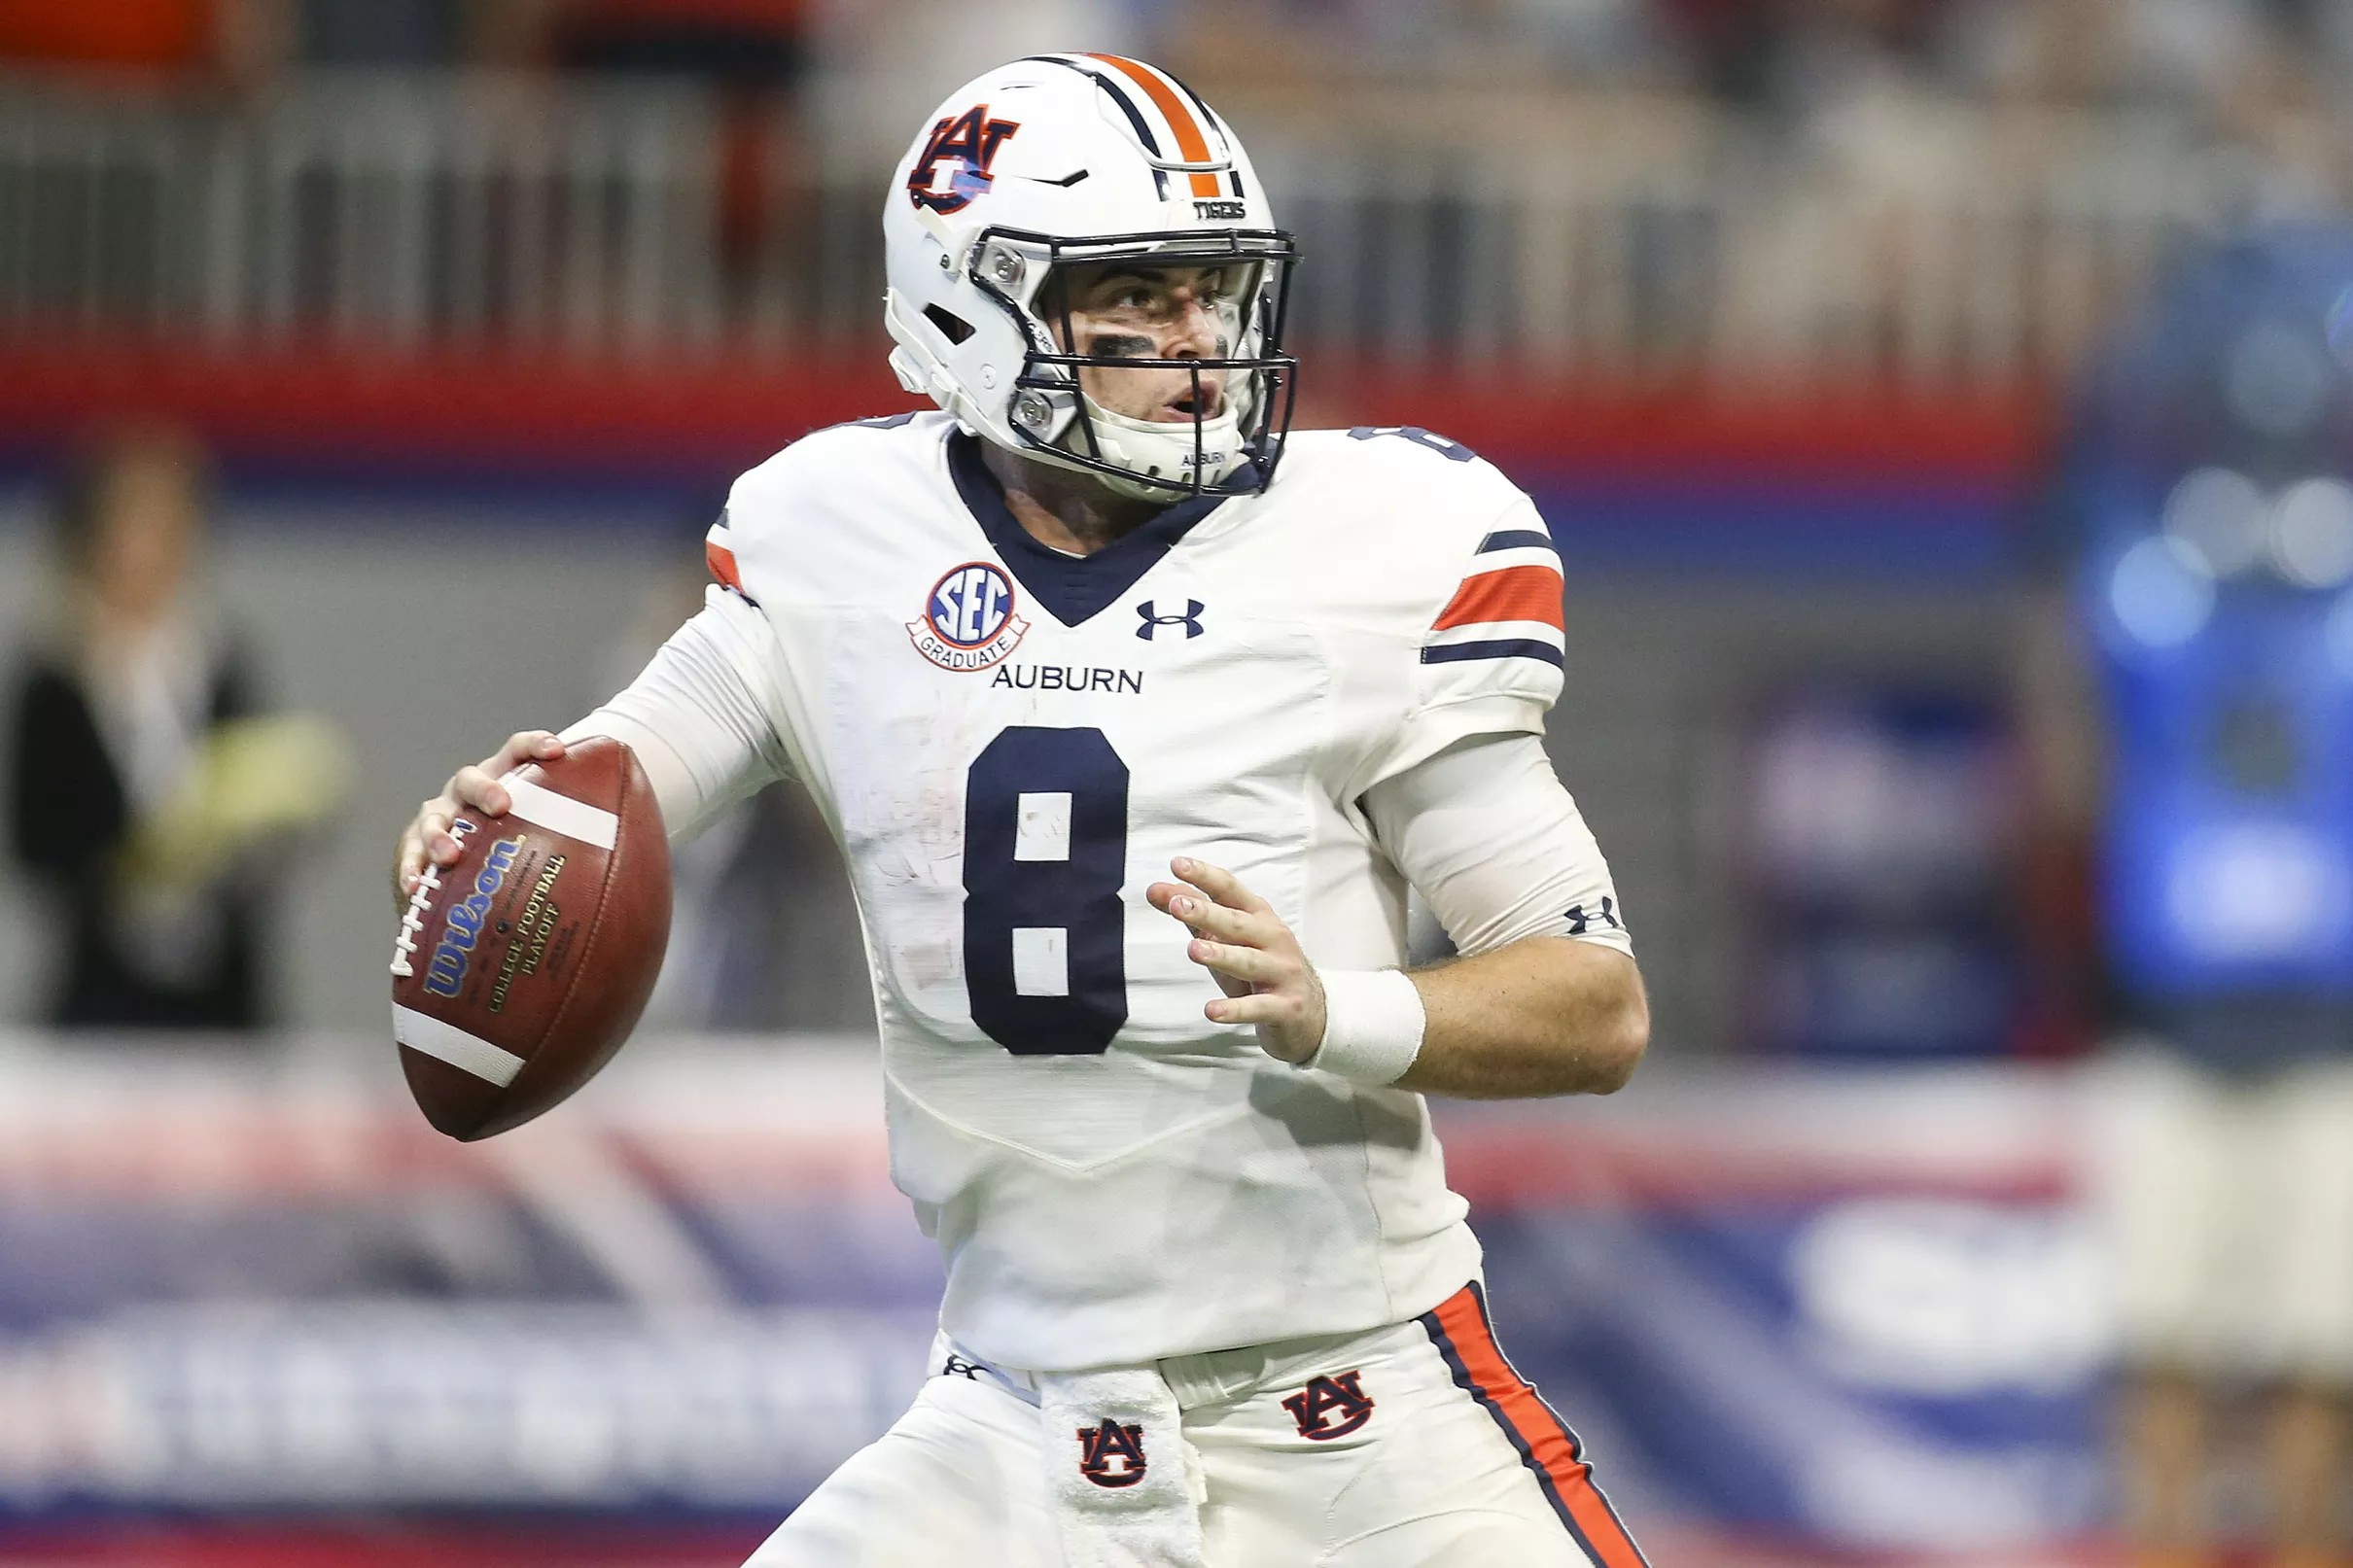 2019 NFL Draft Watch: 6 prospects to watch out for during Week 3